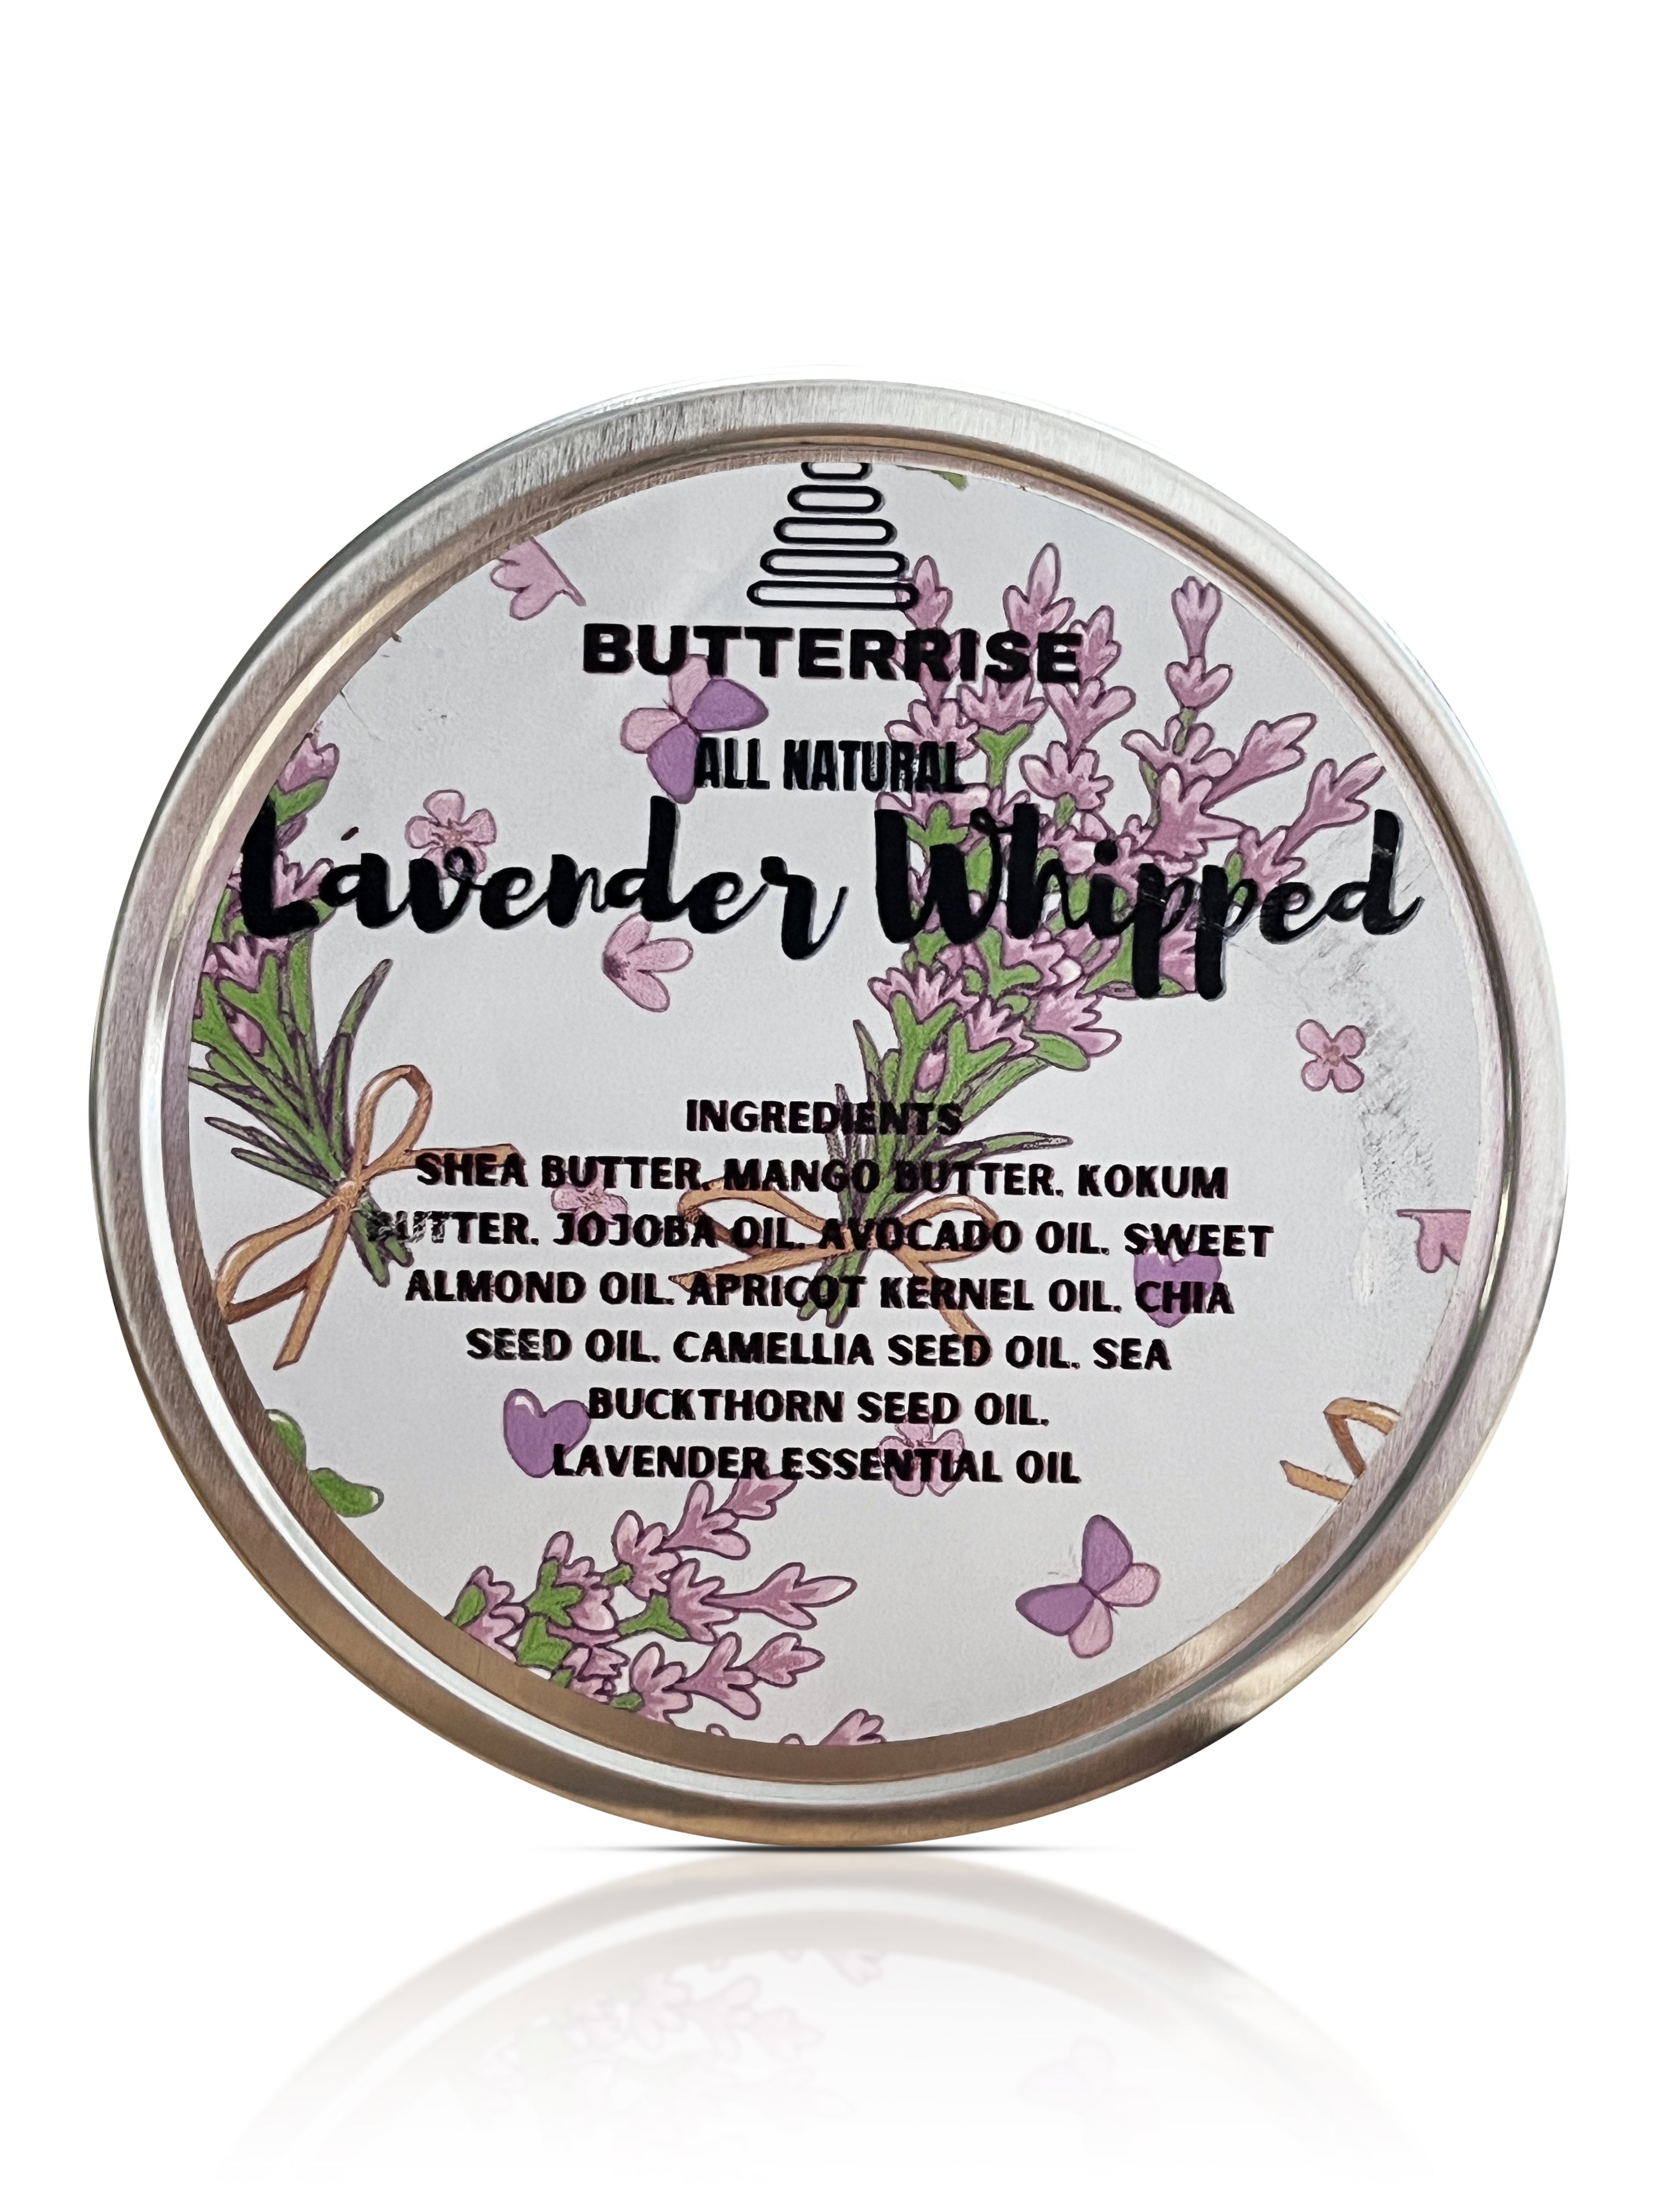  Better Shea Butter Whipped Body Butter LAVENDER - Whipped Body  Butter for Women Dry Skin & Delicate Skin - Paraben-Free, No Synthetic  Fragrances, Non Greasy Body Cream - Lavender Cream 8